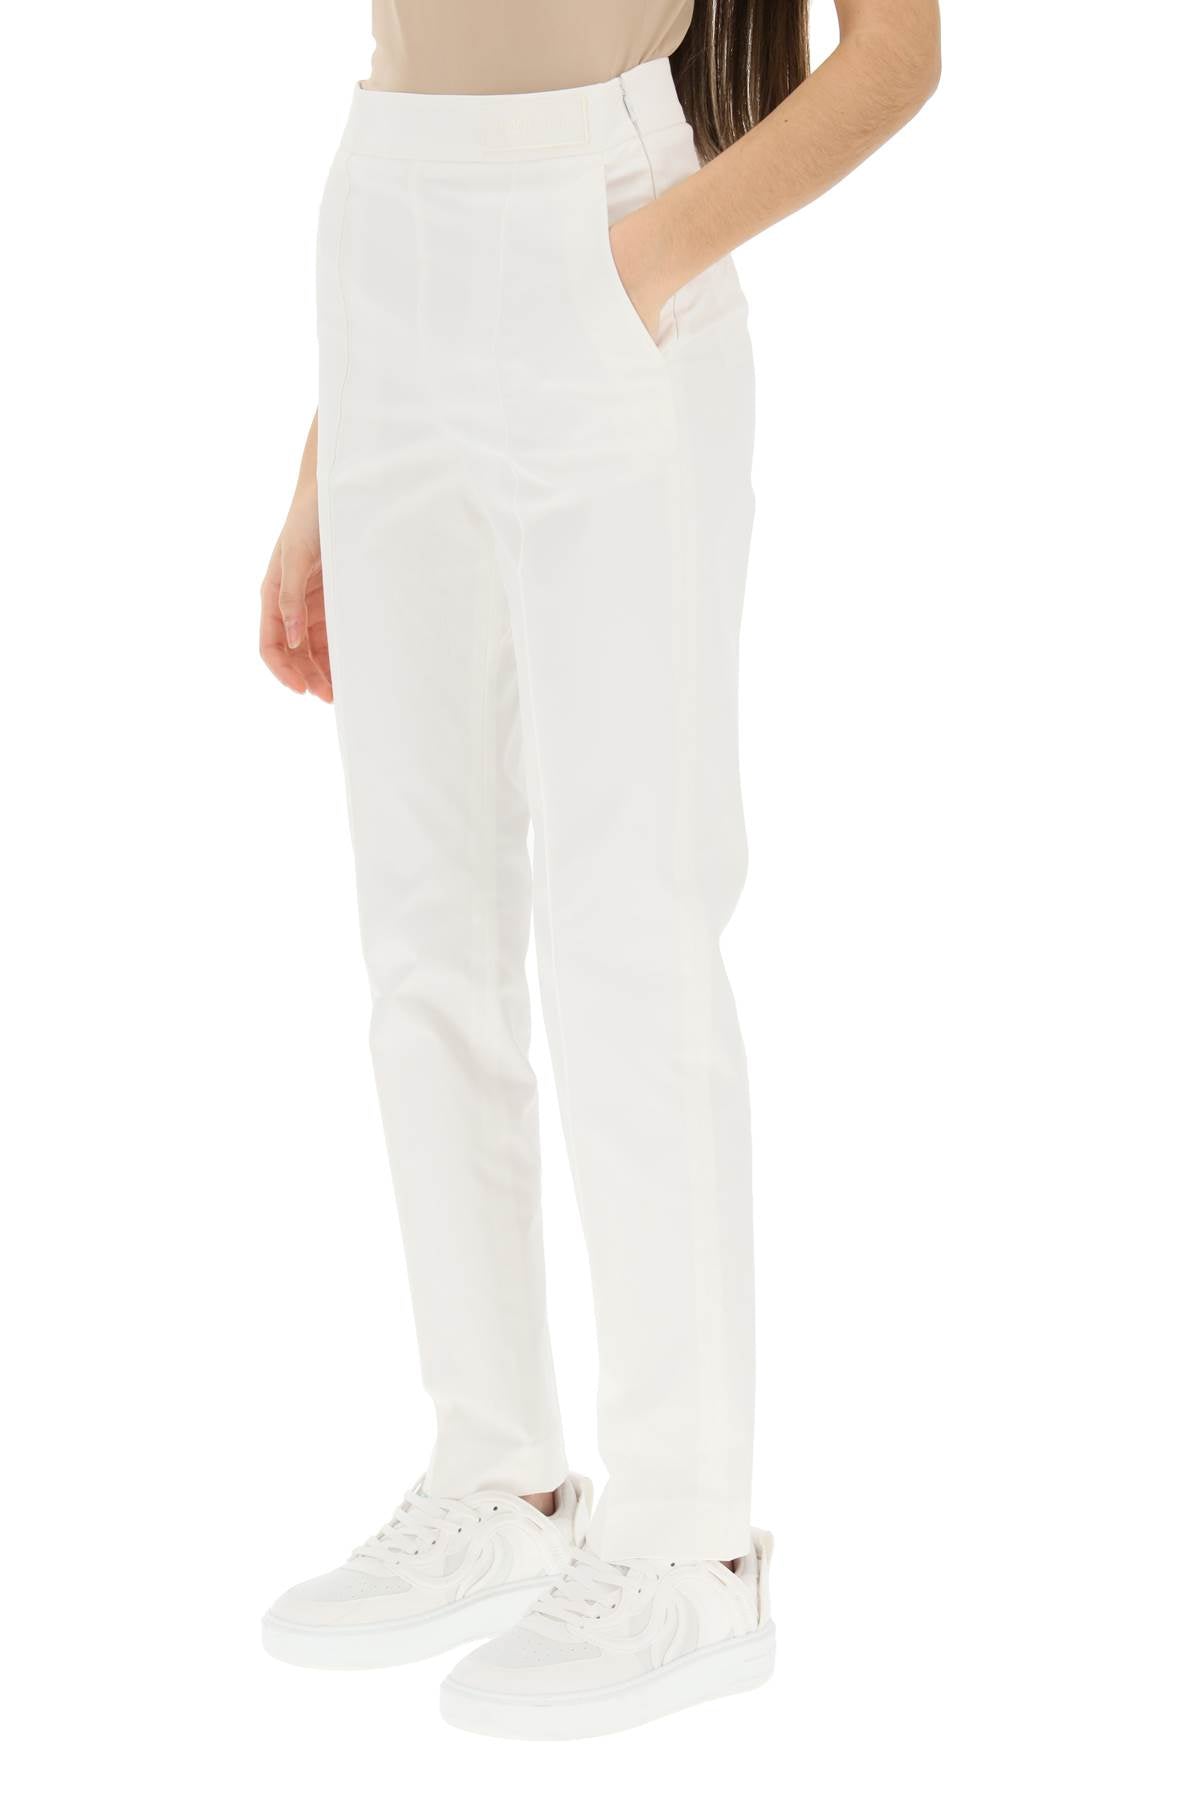 INAYA BY STUDIO LIBAS CIGARETTES 15 STRETCHABLE COTTON CIGARETTE PANTS  COLLECTION - textiledeal.in